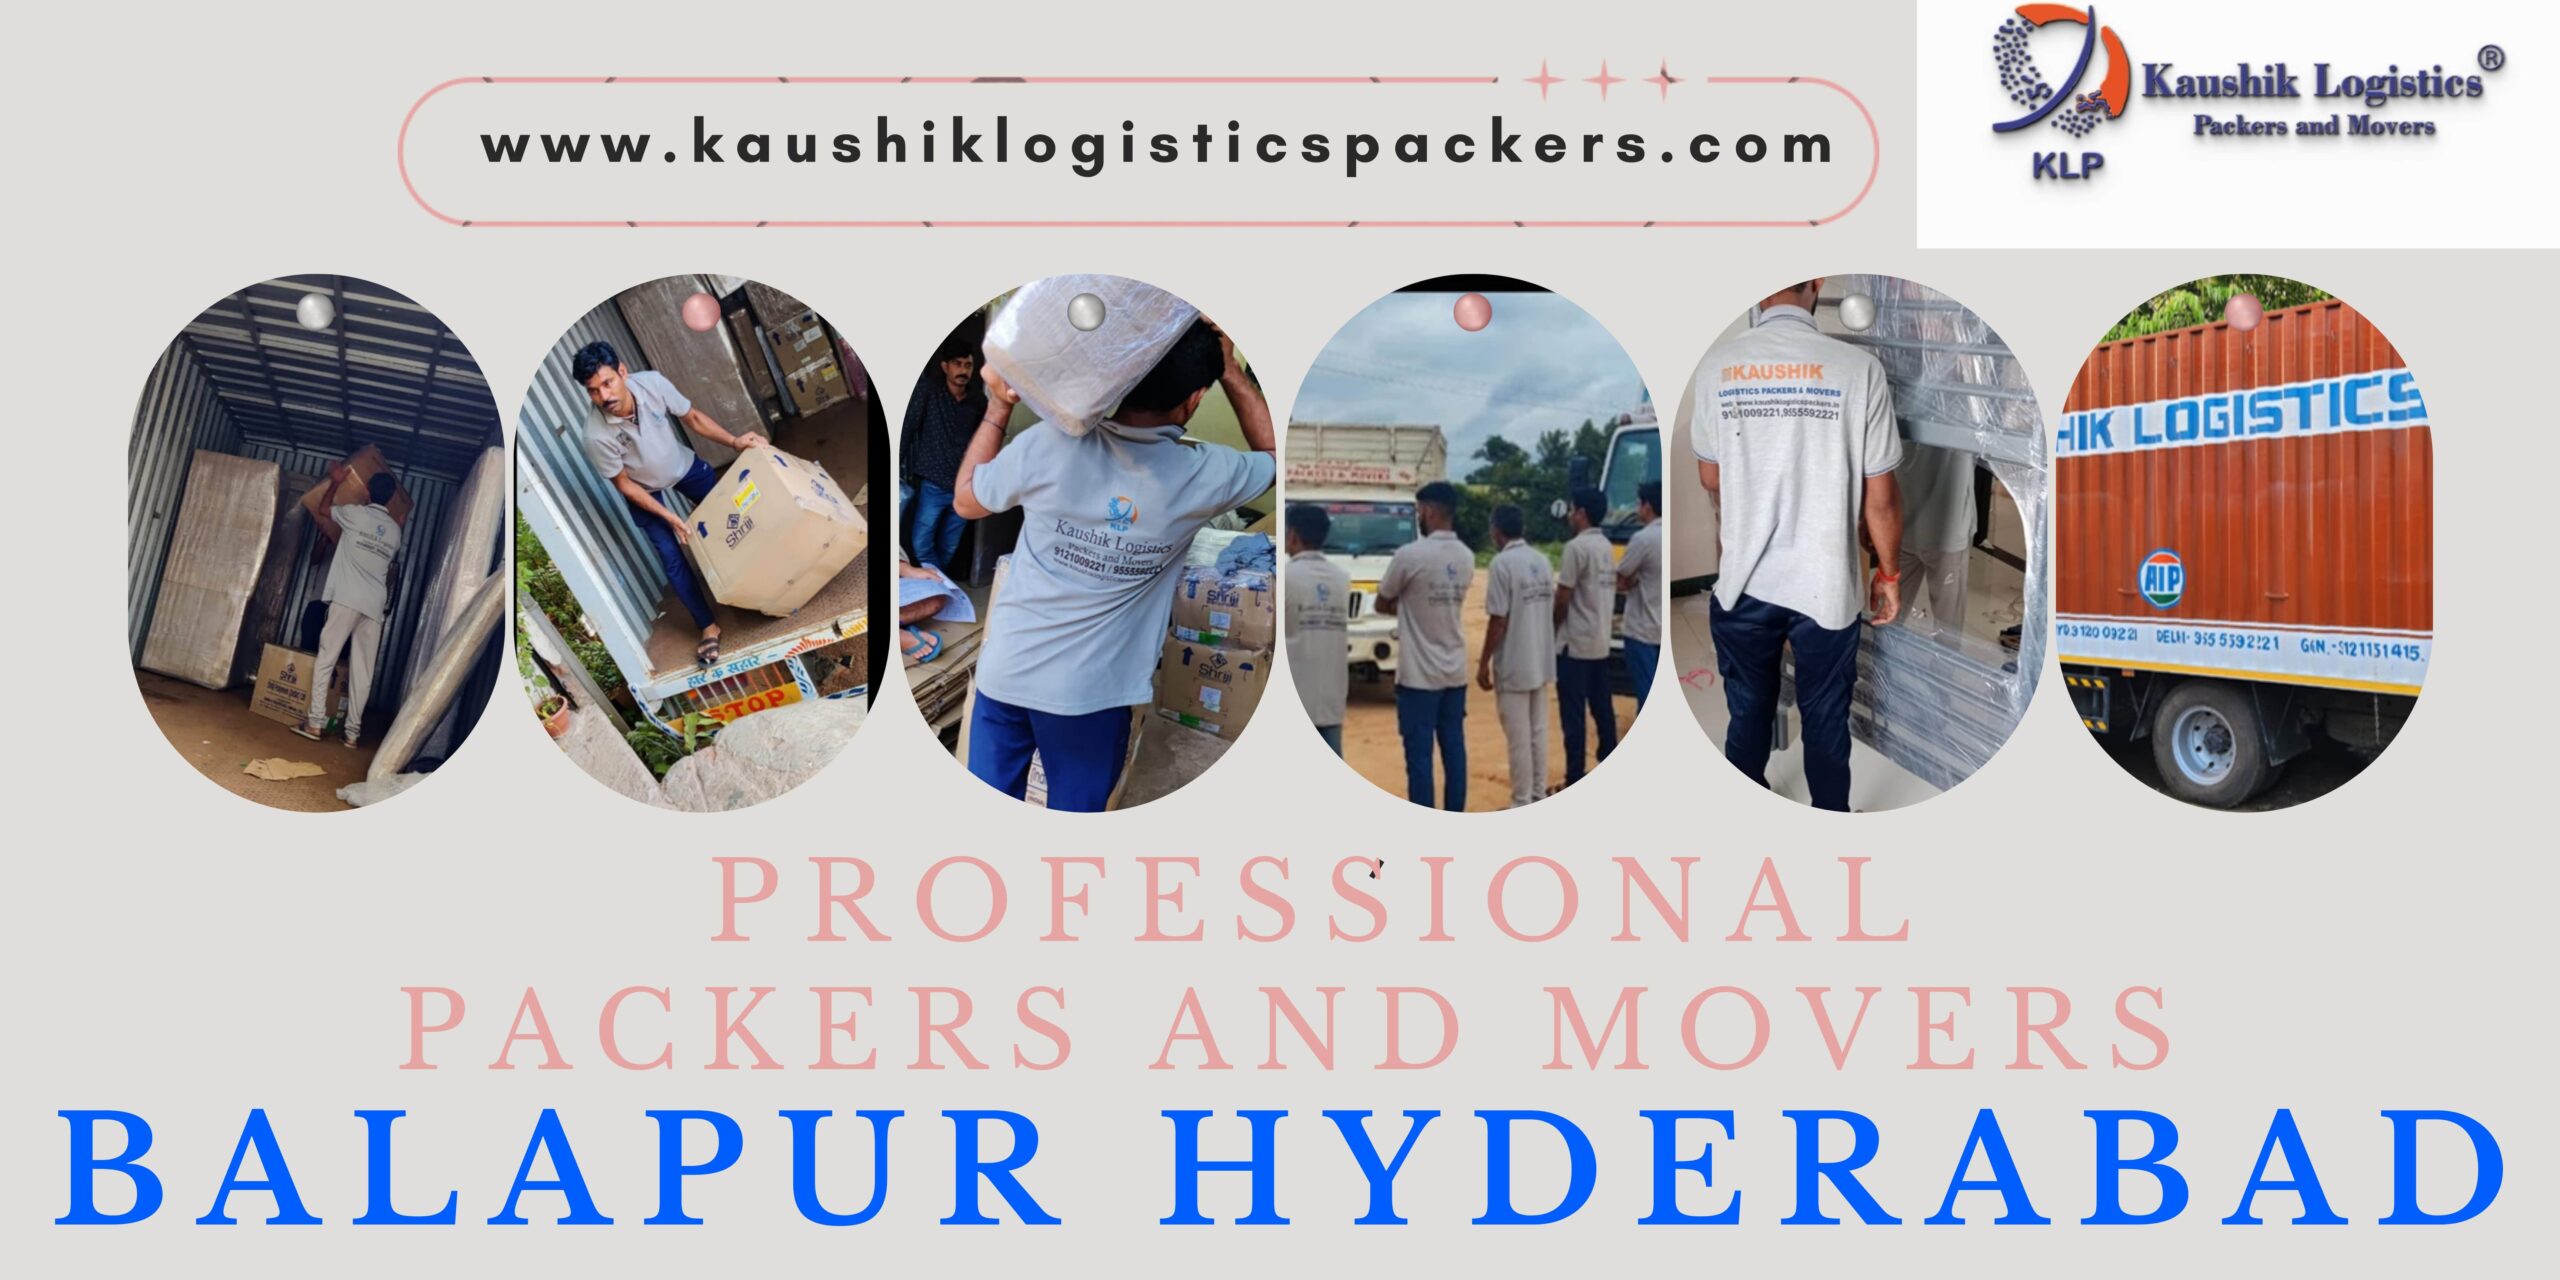 Packers and Movers In Balapur